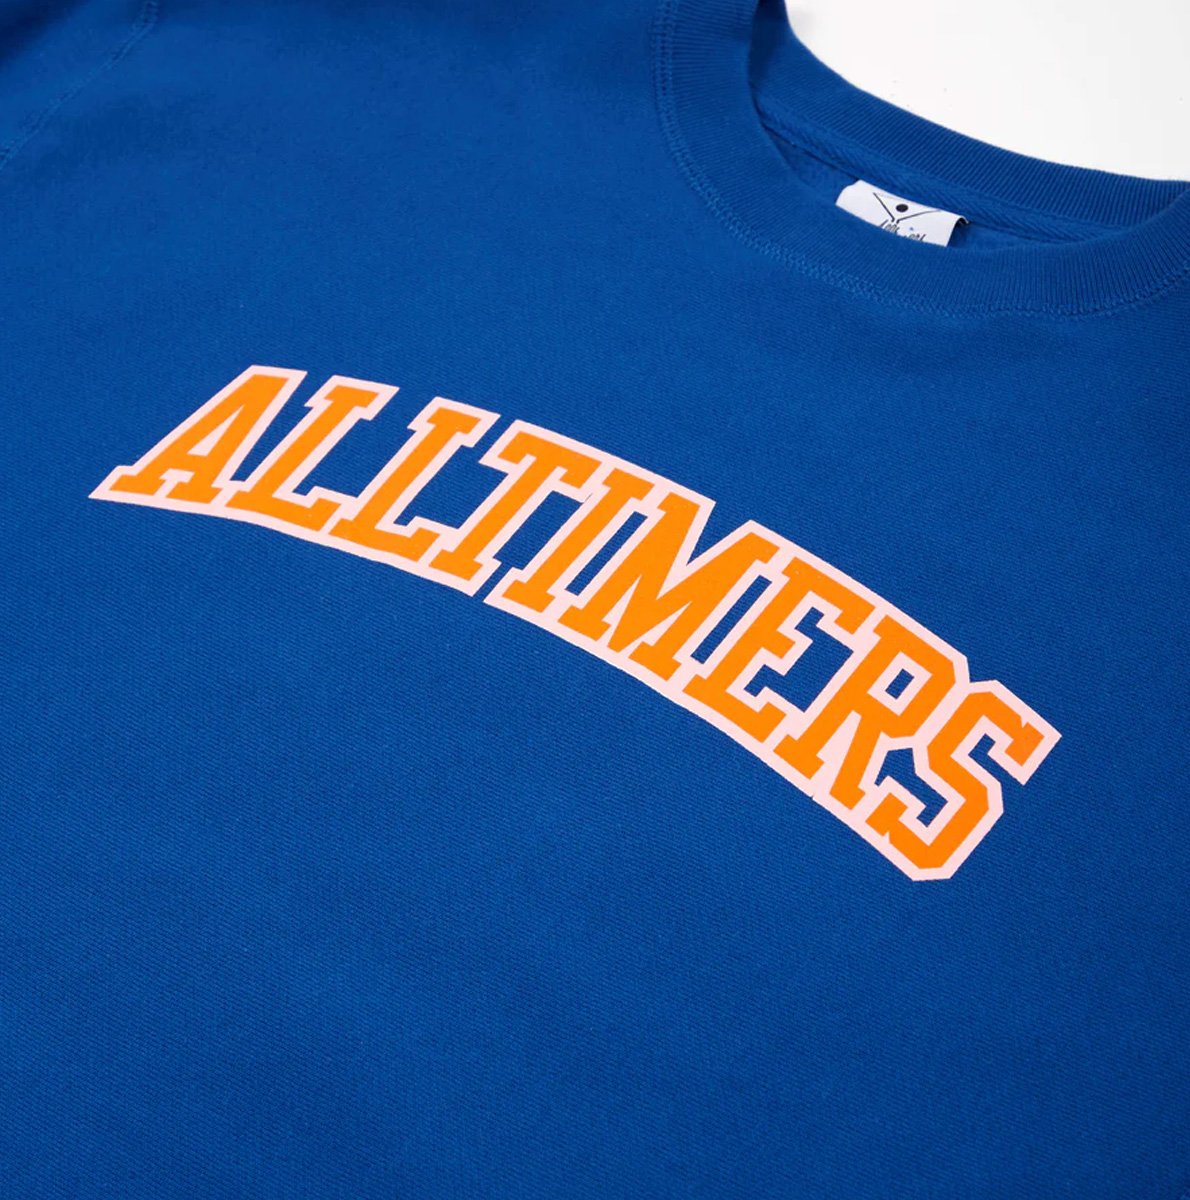 ALLTIMERS CITY COLLEGE CREW ROYAL BLUE